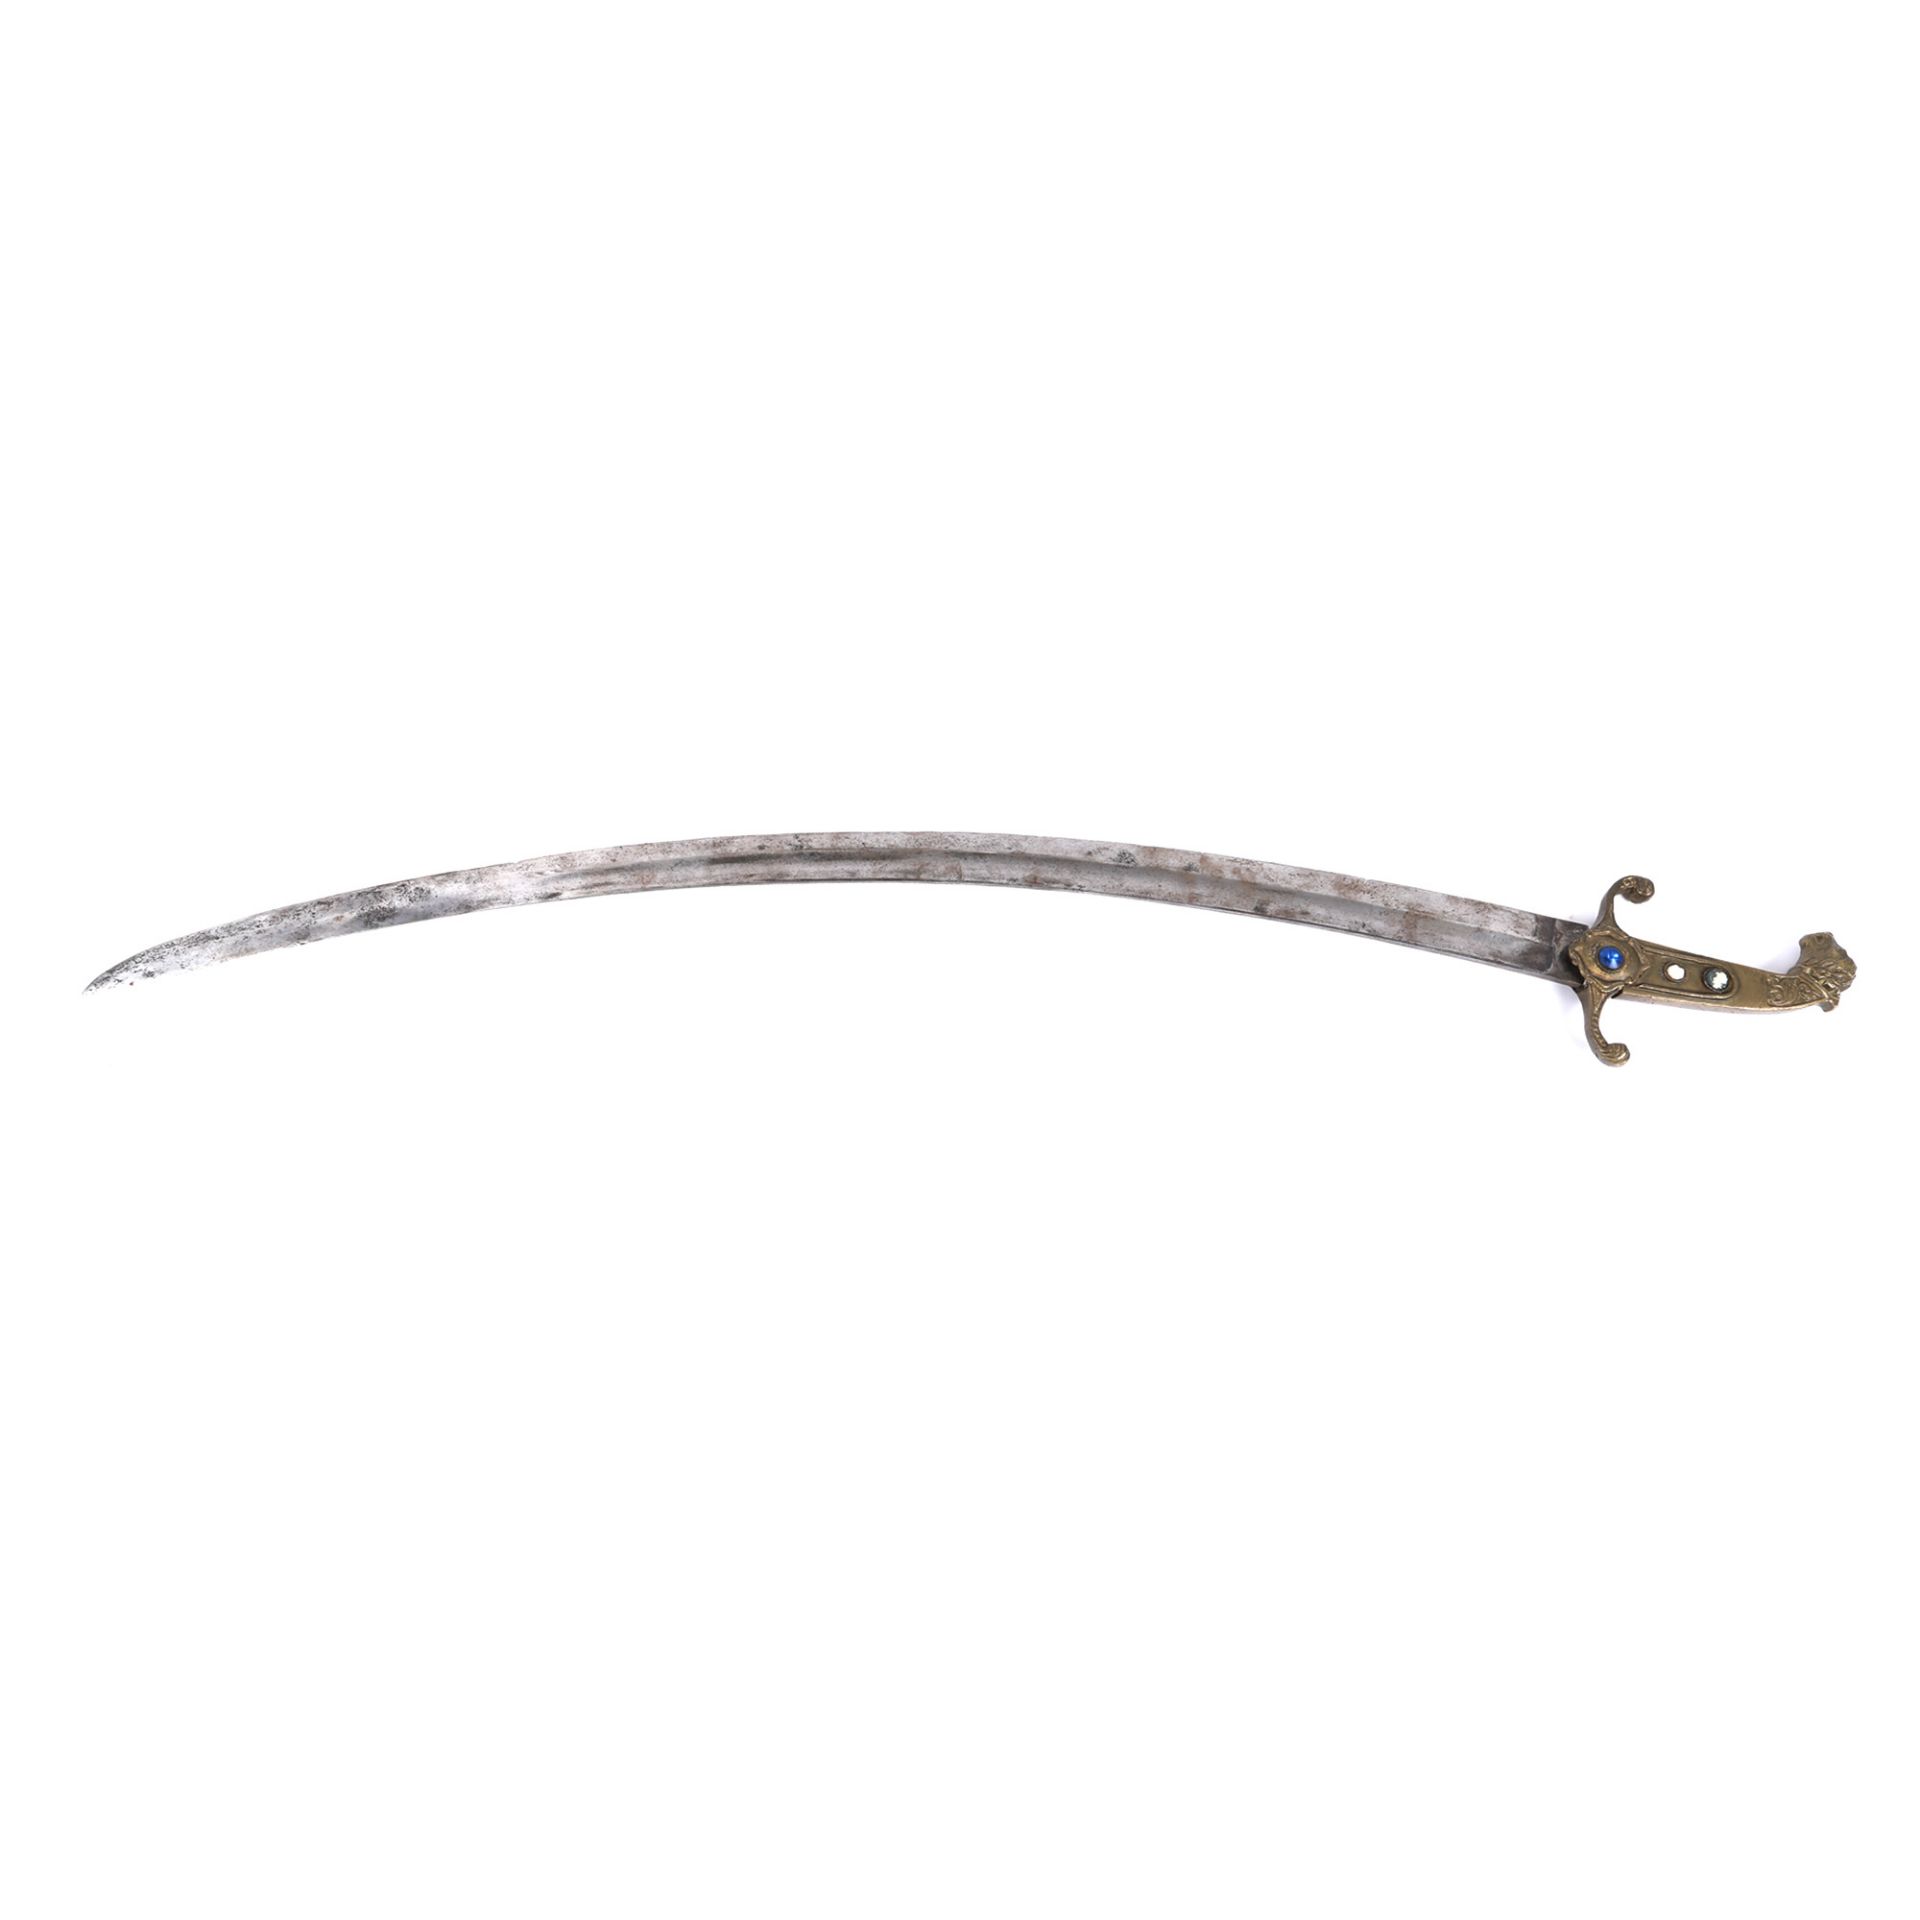 Shamshir Islamic sword, decorated with a lion’s head, end of the 19th century